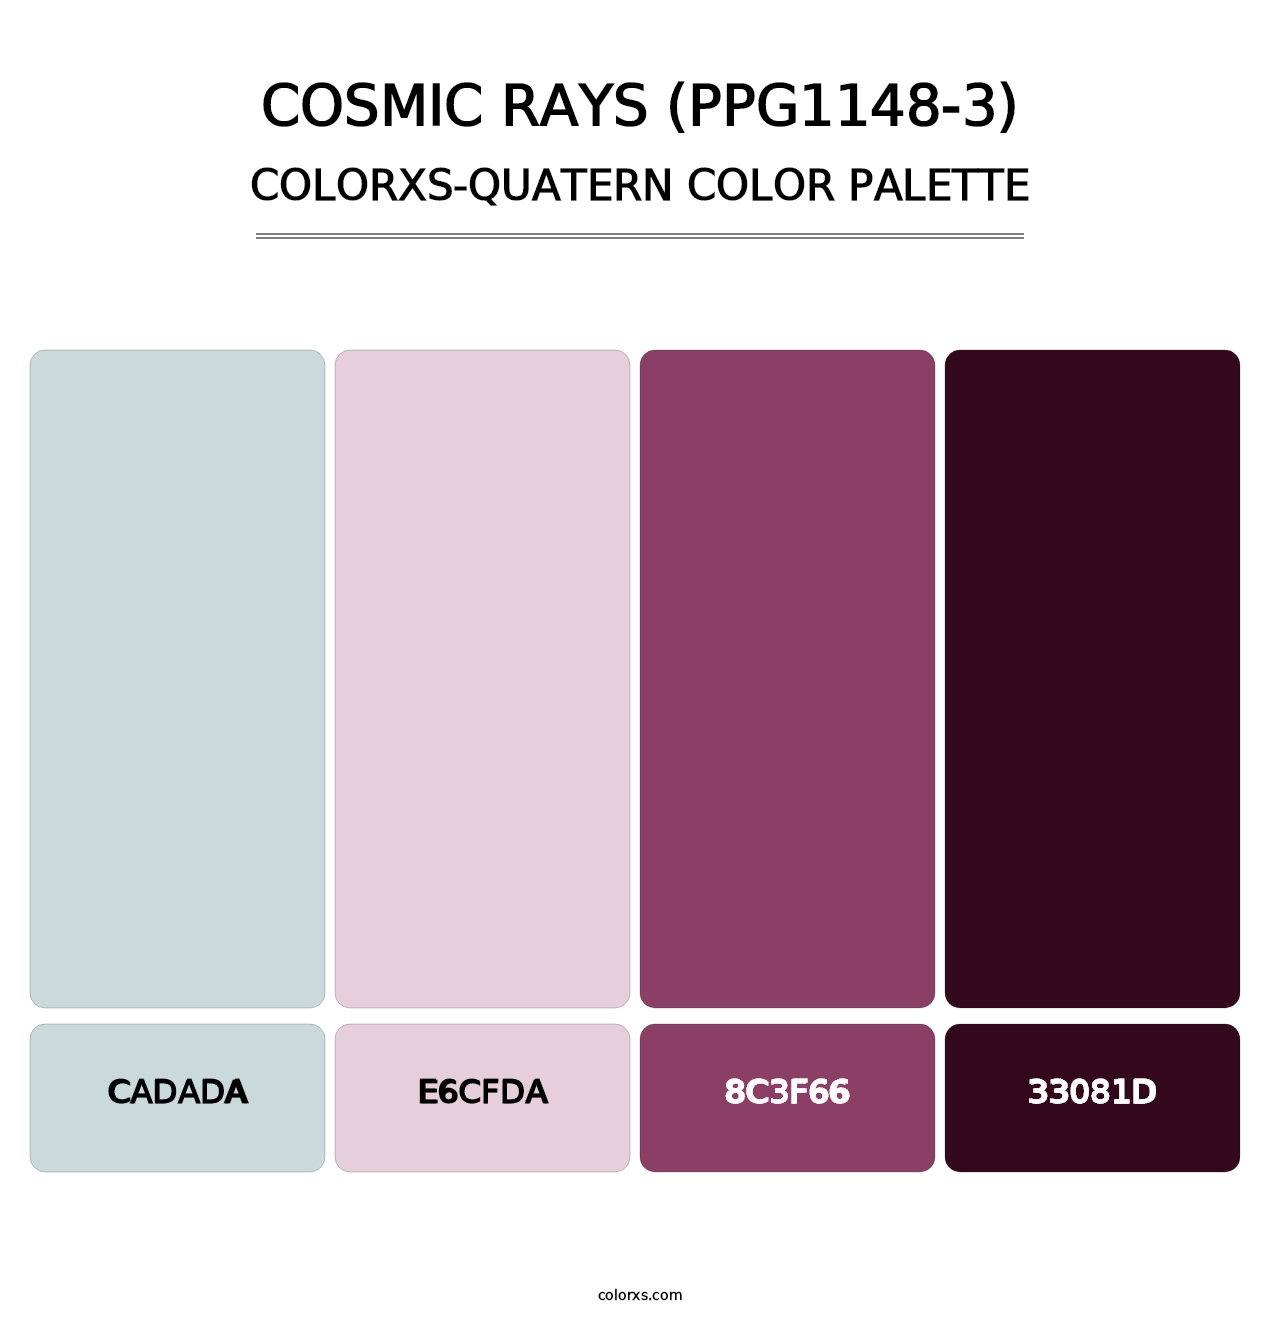 Cosmic Rays (PPG1148-3) - Colorxs Quatern Palette